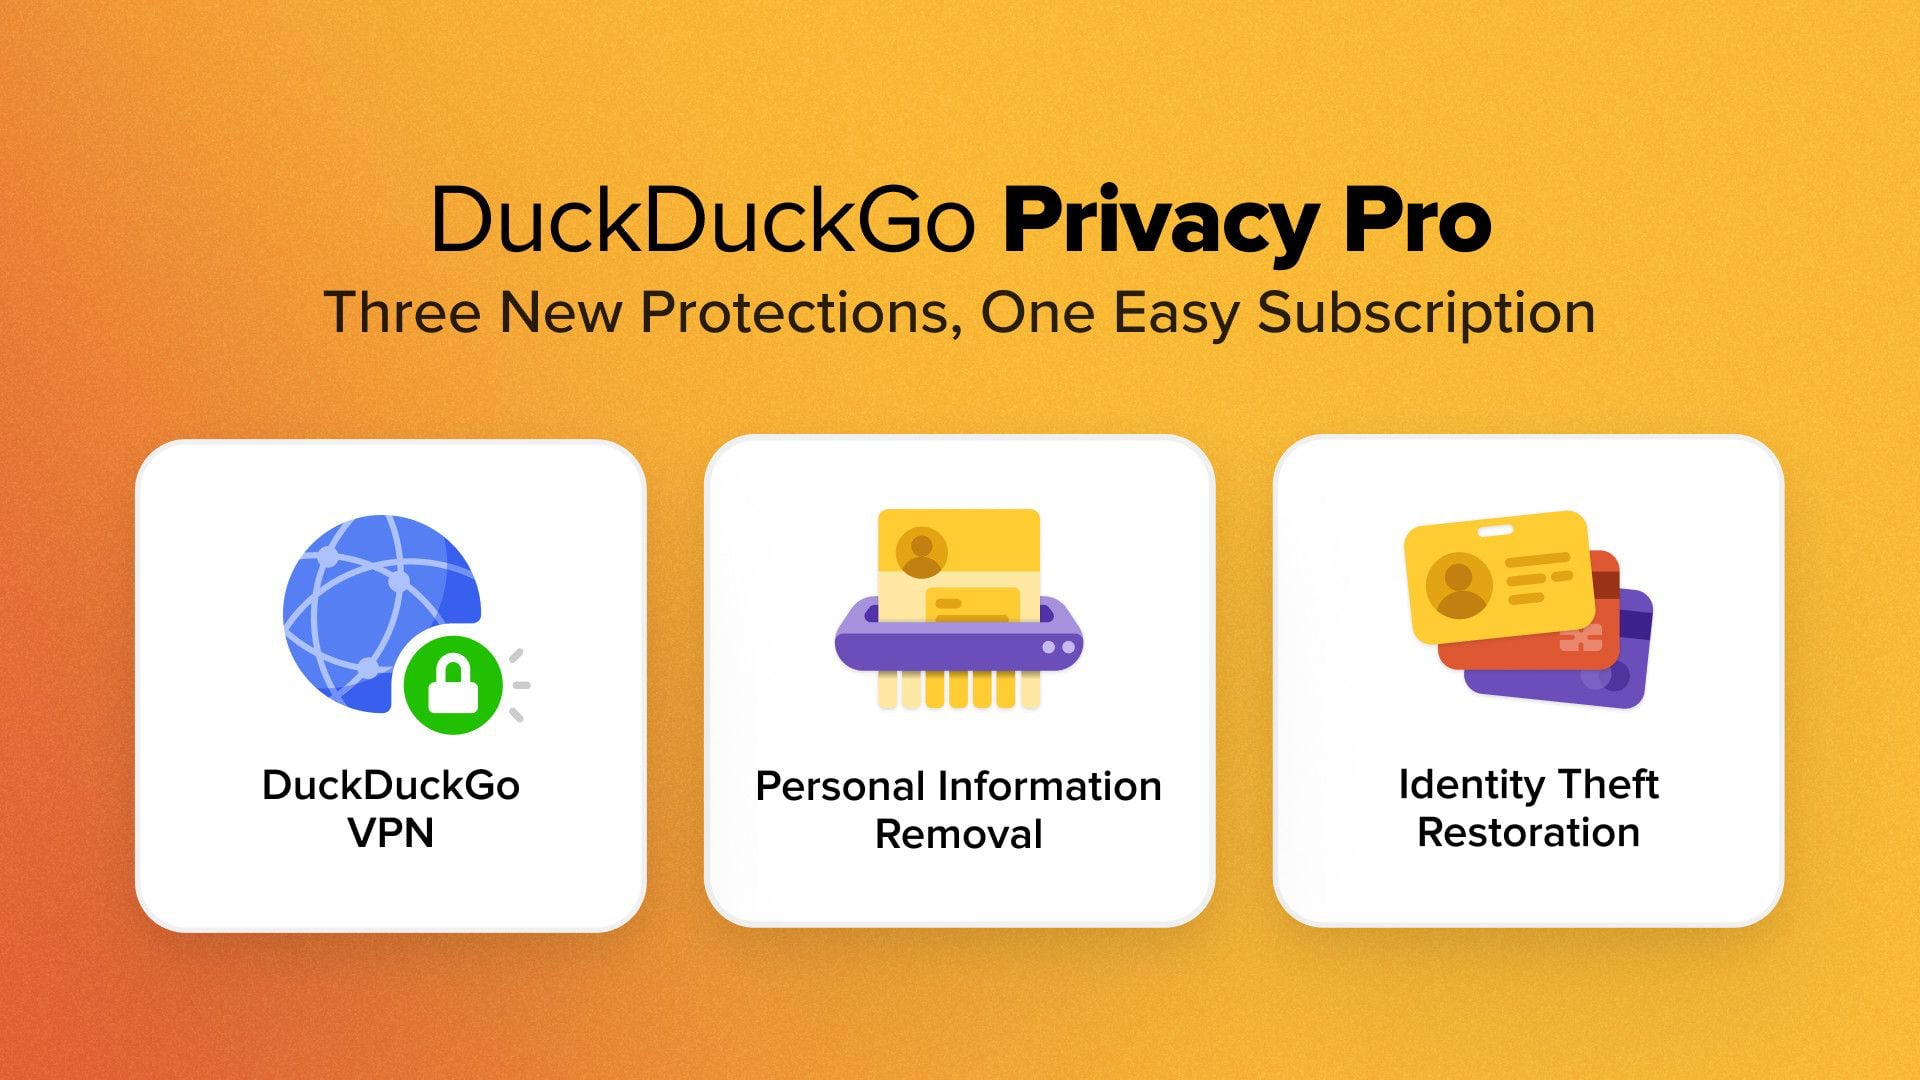 DuckDuckGo Launches 3-in-1 'Privacy Pro' Subscription With VPN and Personal Data Removal Tool